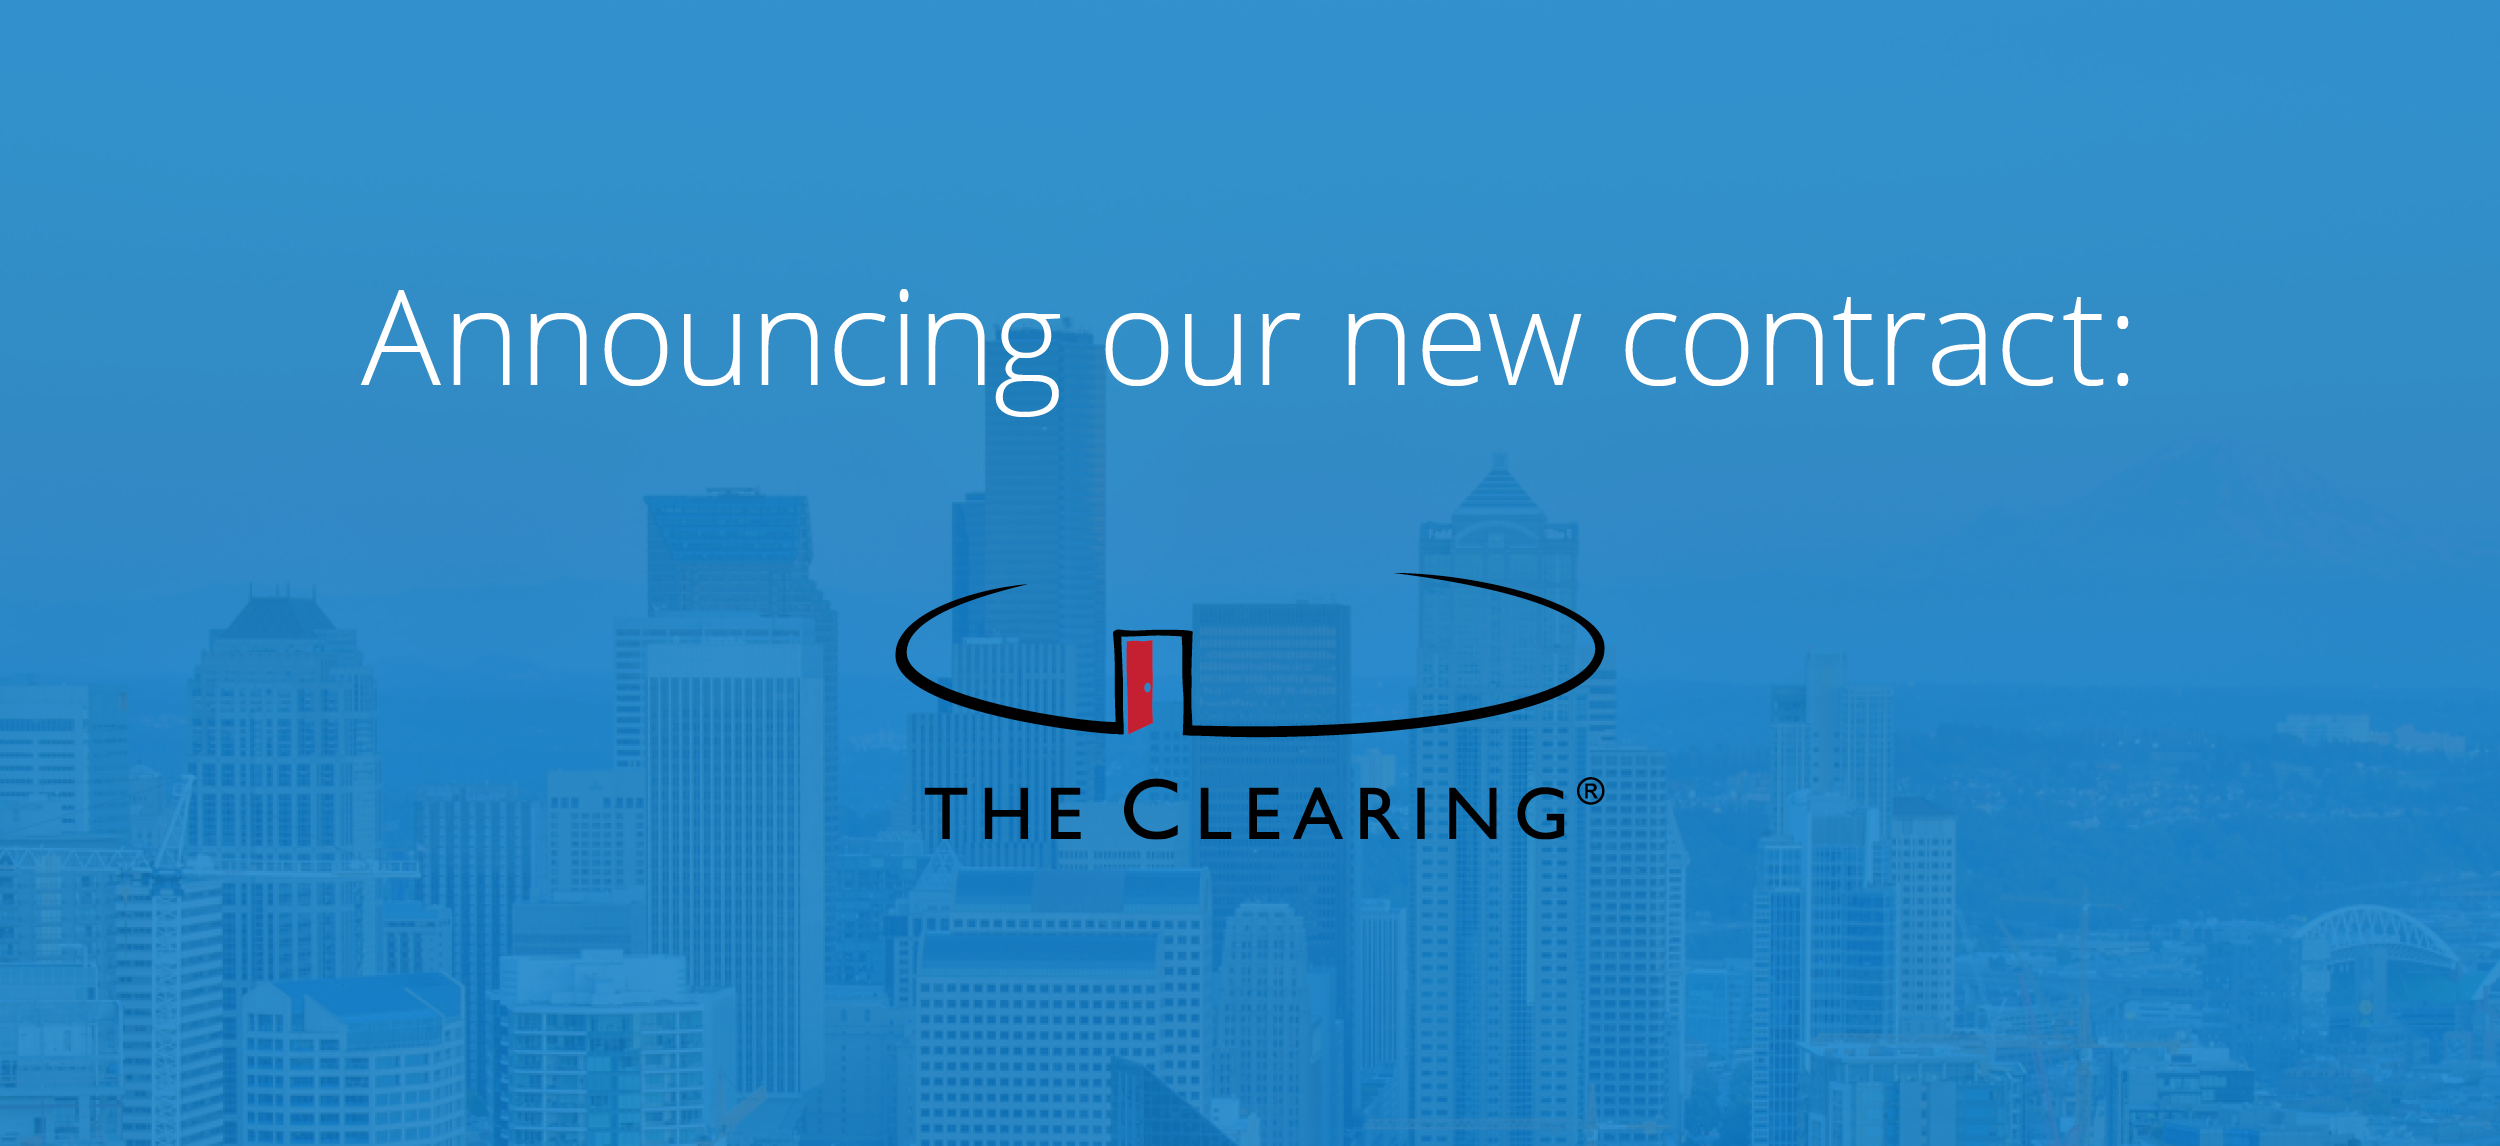 Announcing The Clearing: Our Newest Contract